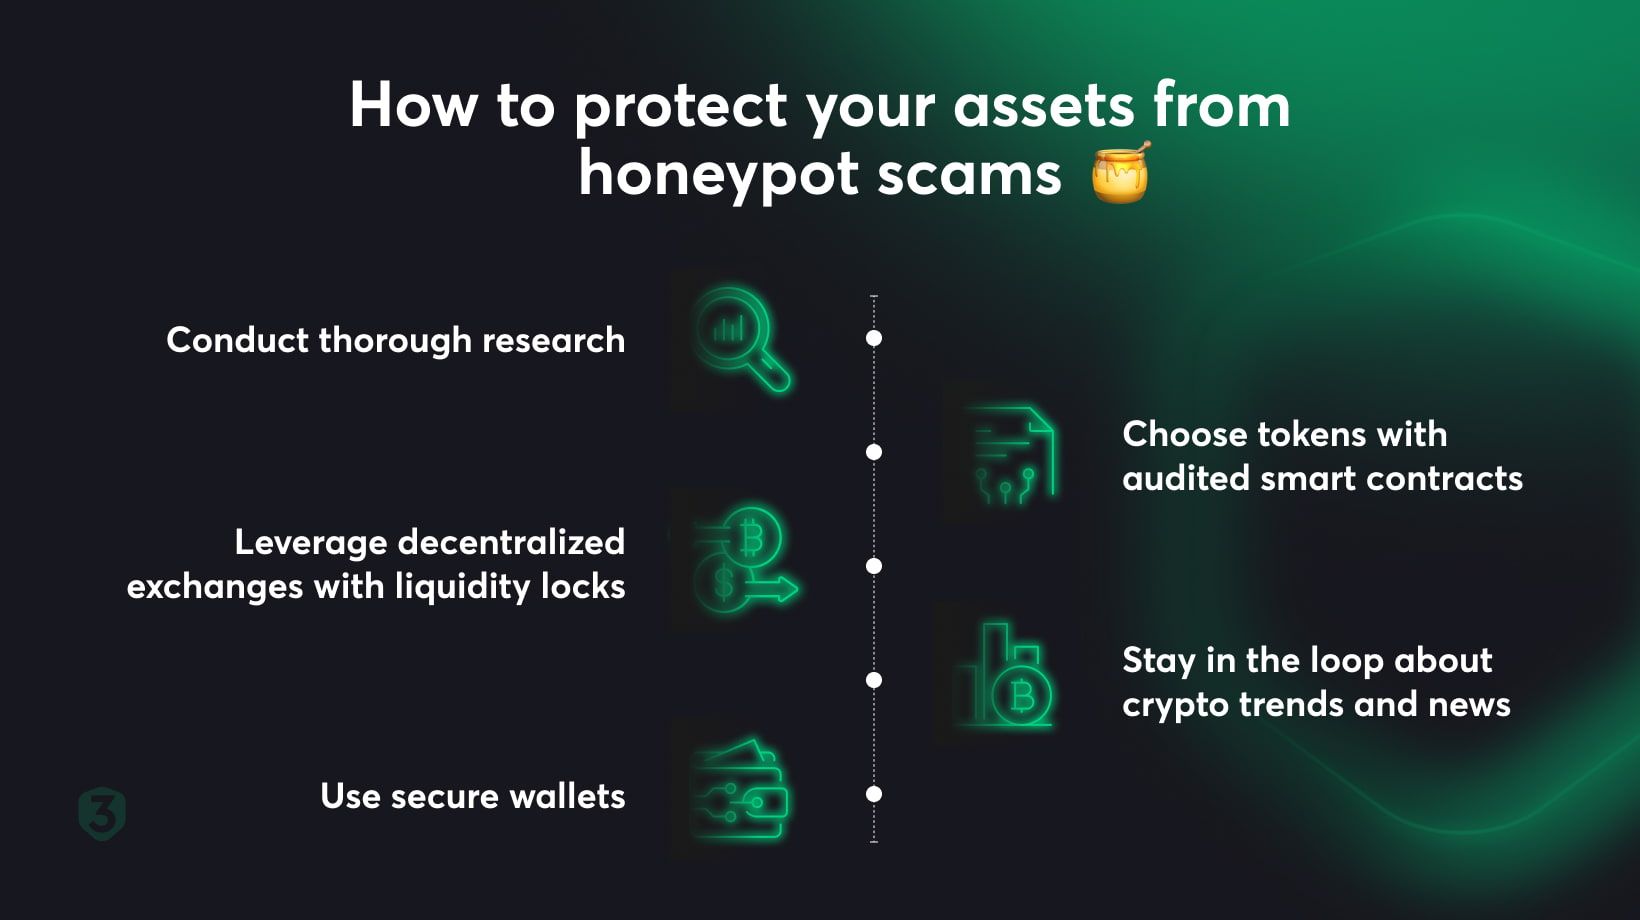 Practical tips on how to protect your tokens from honeypot scams.jpg